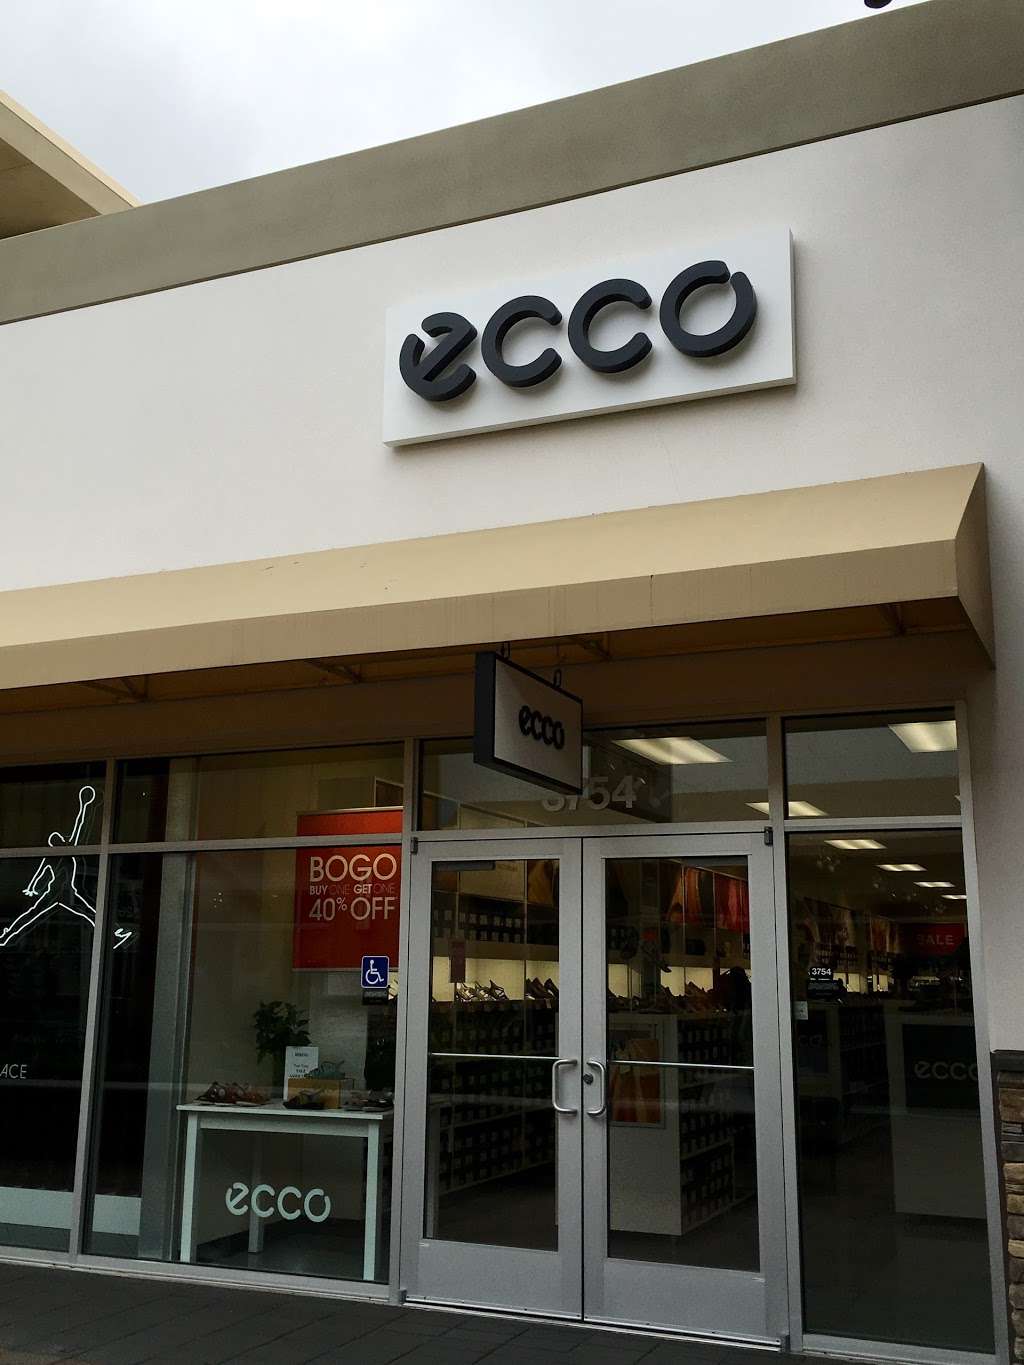 ecco outlets